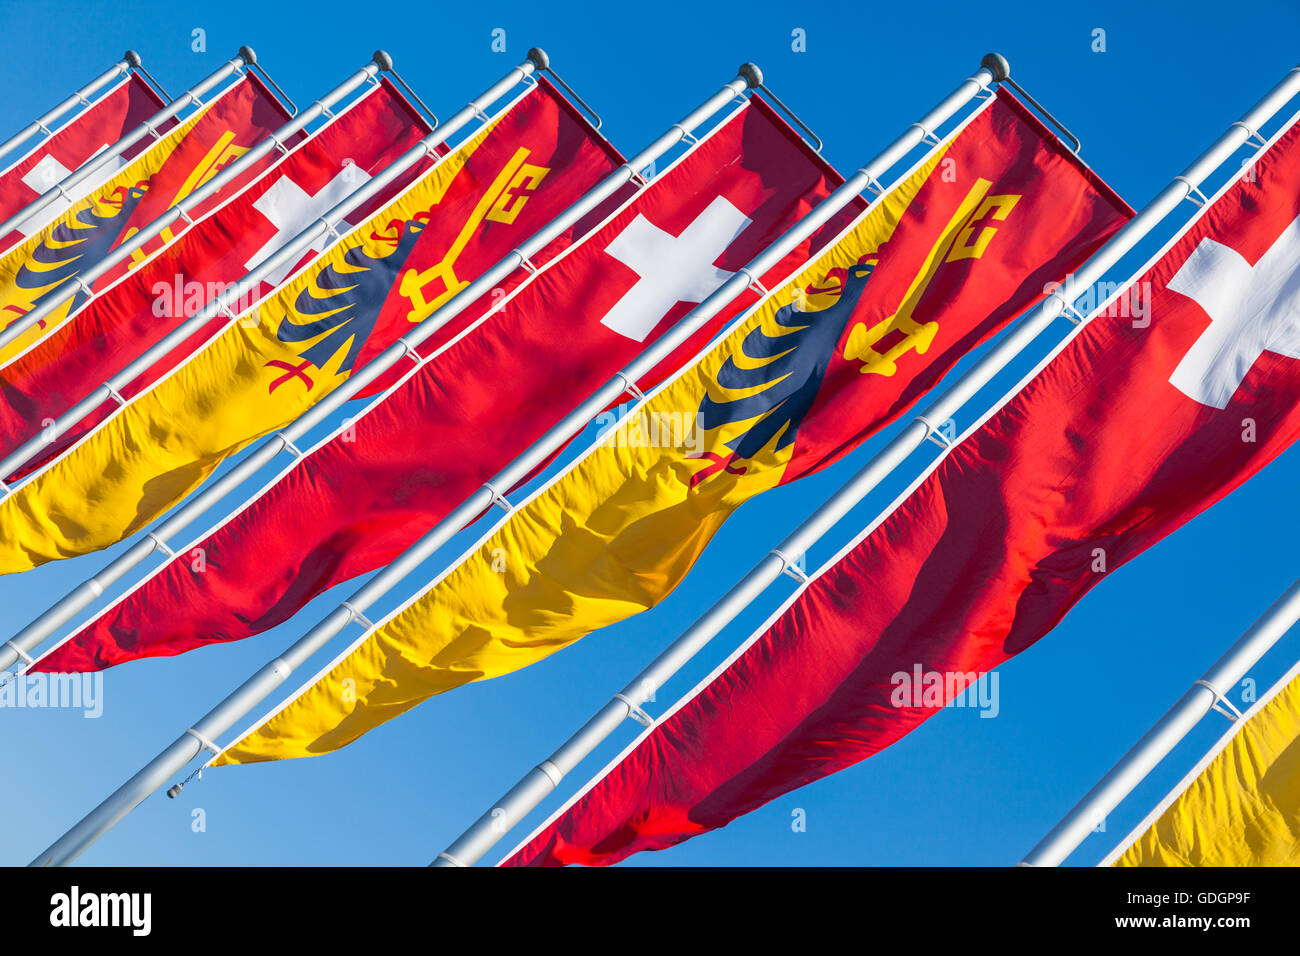 Swiss flag and Canton of Geneva banners blowing in the wind by Lake Geneva Stock Photo